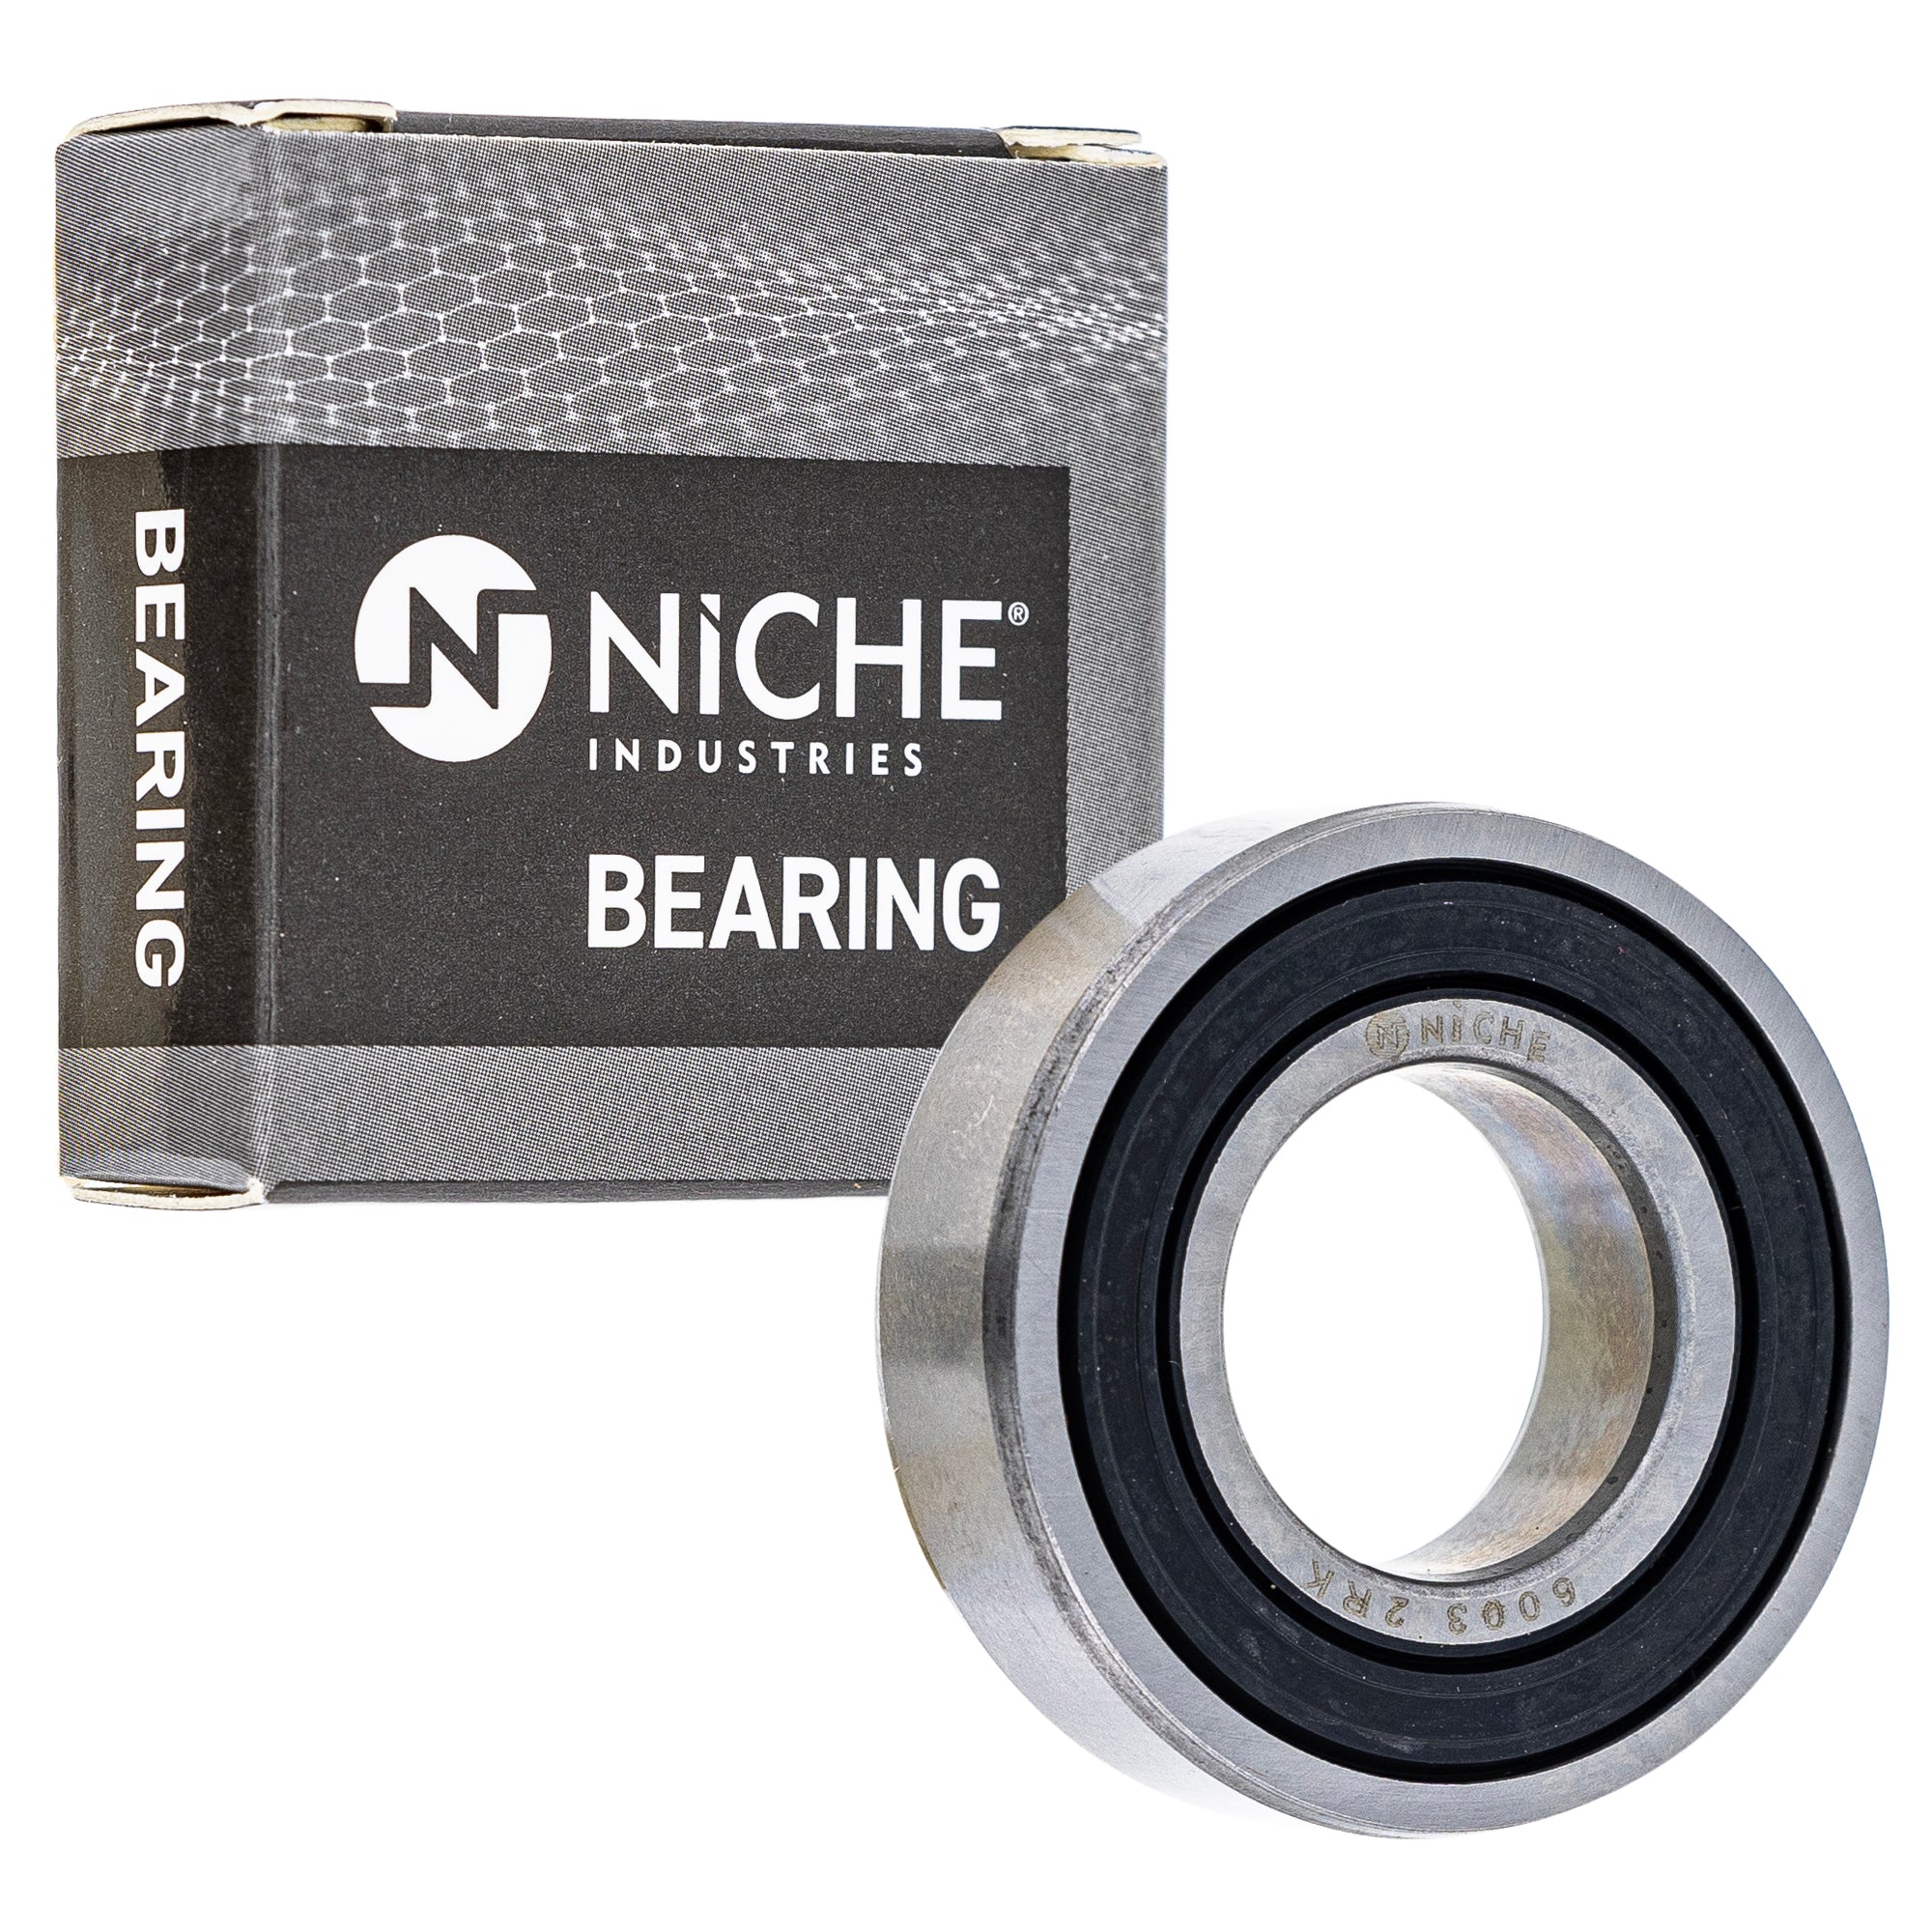 NICHE 519-CBB2325R Bearing & Seal Kit 10-Pack for zOTHER Arctic Cat